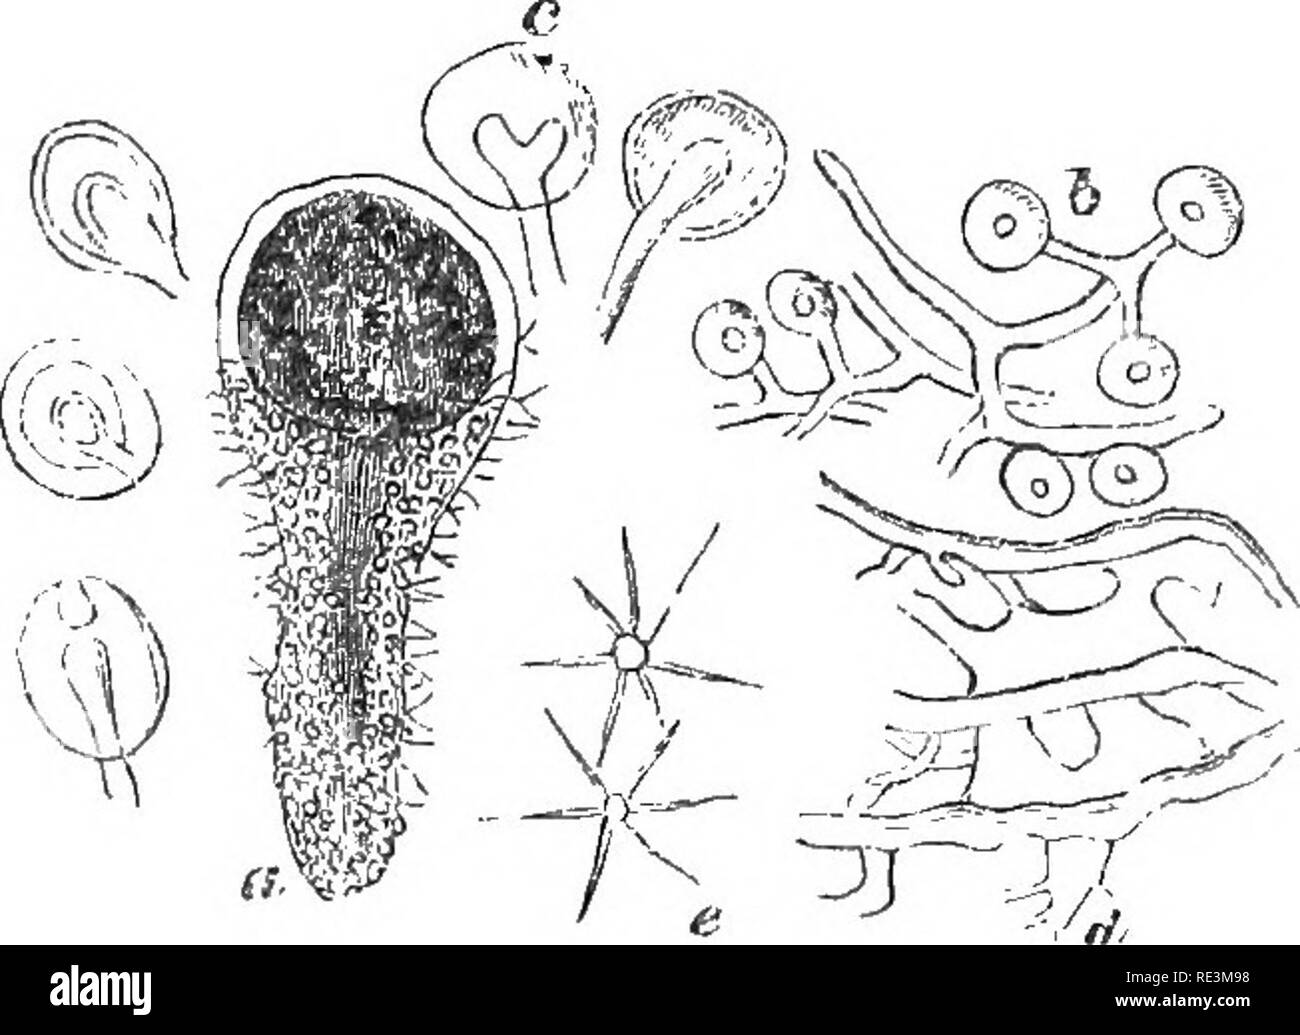 . Introduction to cryptogamic botany. Cryptogams. INTEODUCTION TO CllYPTOGAMIC BOTANY. 341. Fig. 76. Emericella variecolor, Berk, and Br. u.. Vertical section of peridium and stem. b. Gonidloid cells on the threads, with which the lower part of the stem is clothed. c. Gonidioid cells in various conditions. d. Tissue of centre of stem. e. Spores with processes all situated in the same plane. All more or less magnified. a spongy central column, giving off threads which are termi- nated by large globose bodies resembling closely the gonidia of Lichens, but growing very much like the Palmella, fig Stock Photo